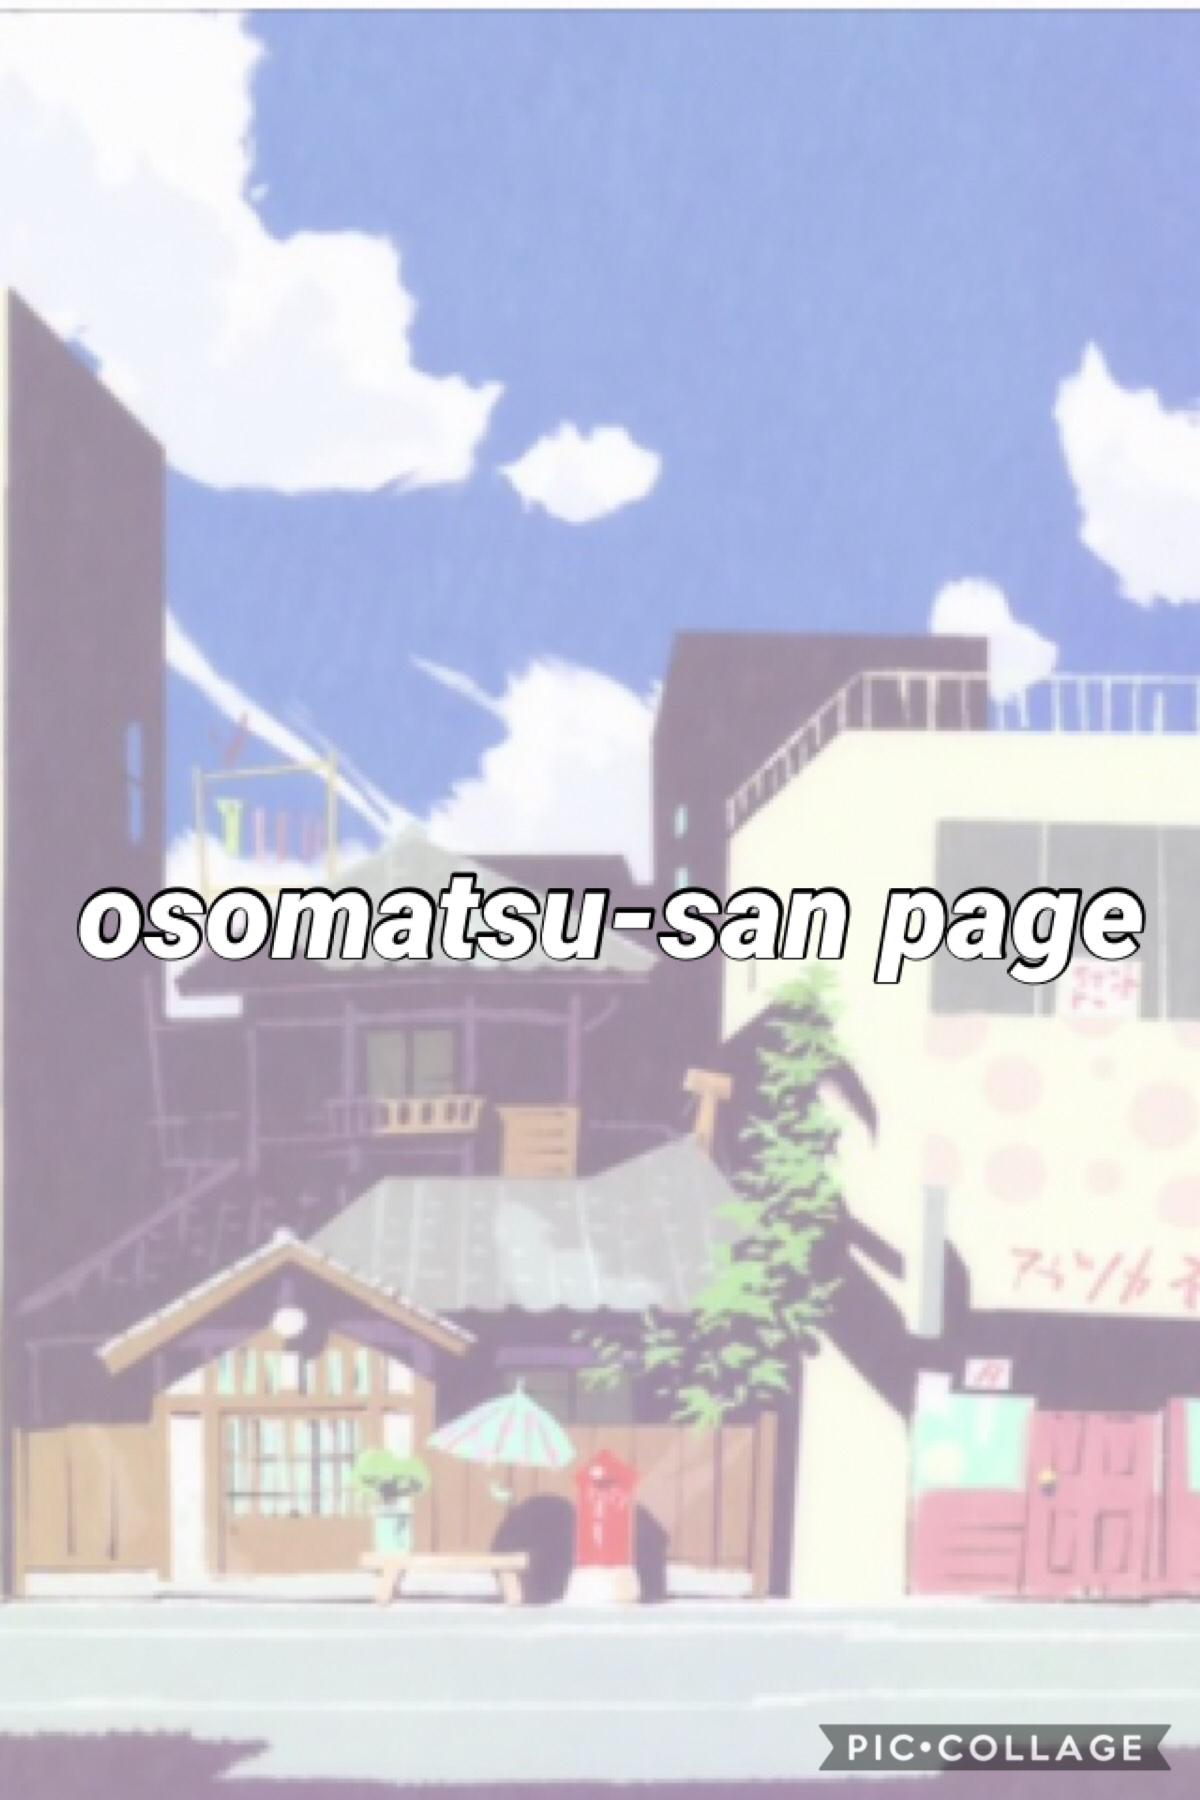 -reply- hustle, hustle! muscle, muscle! chat about osomatsu-san here! also, spoiler warning!